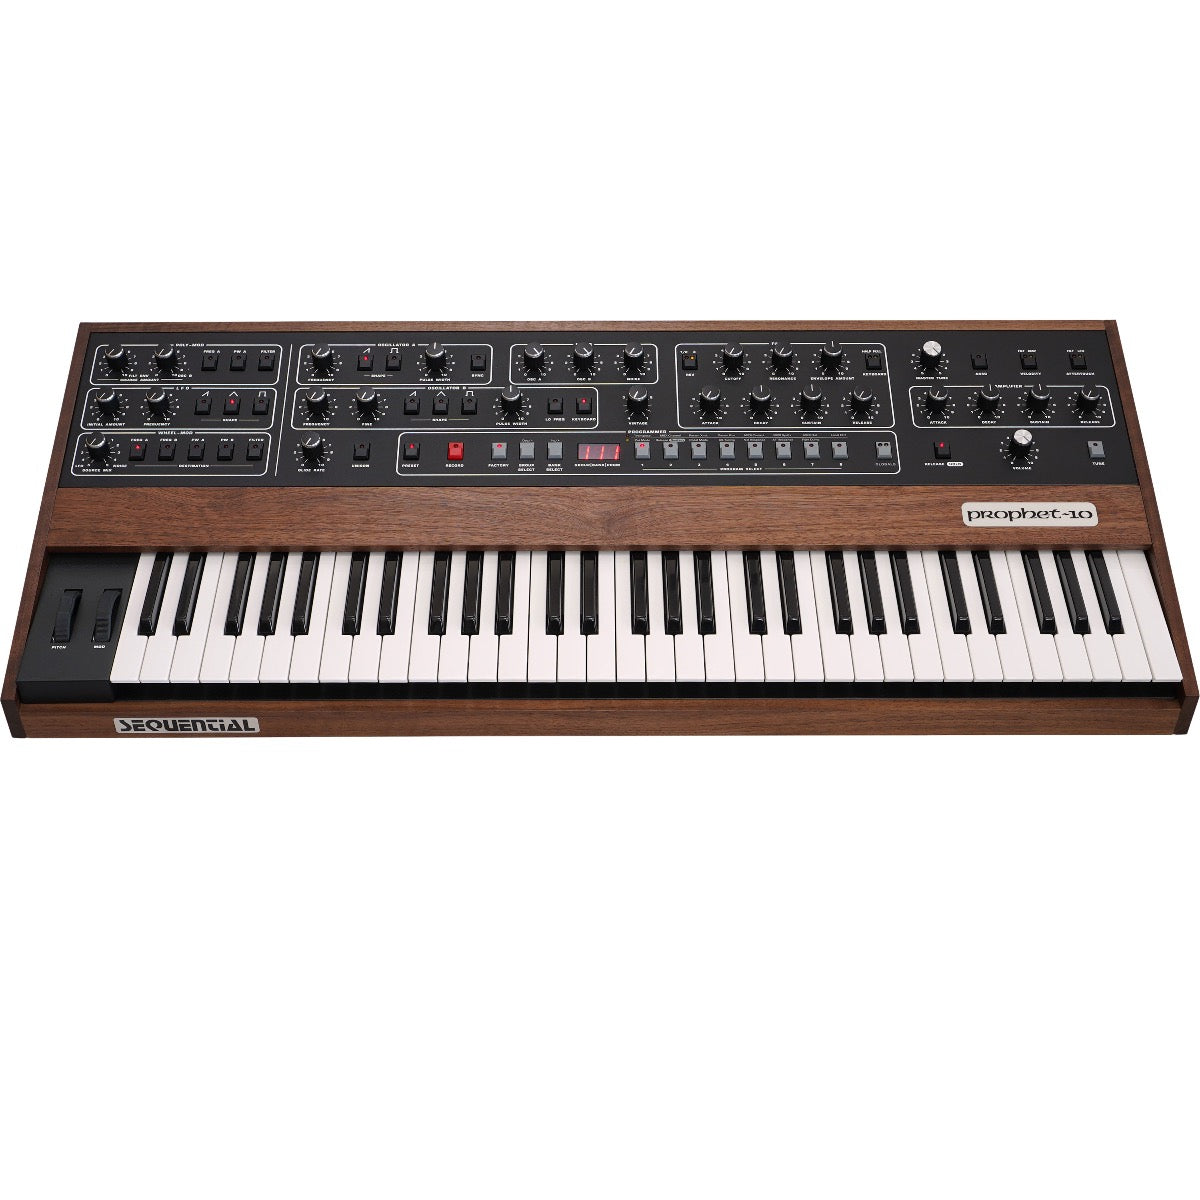 Perspective view of Sequential Prophet-10 Polyphonic Analog Keyboard Synthesizer showing top and front